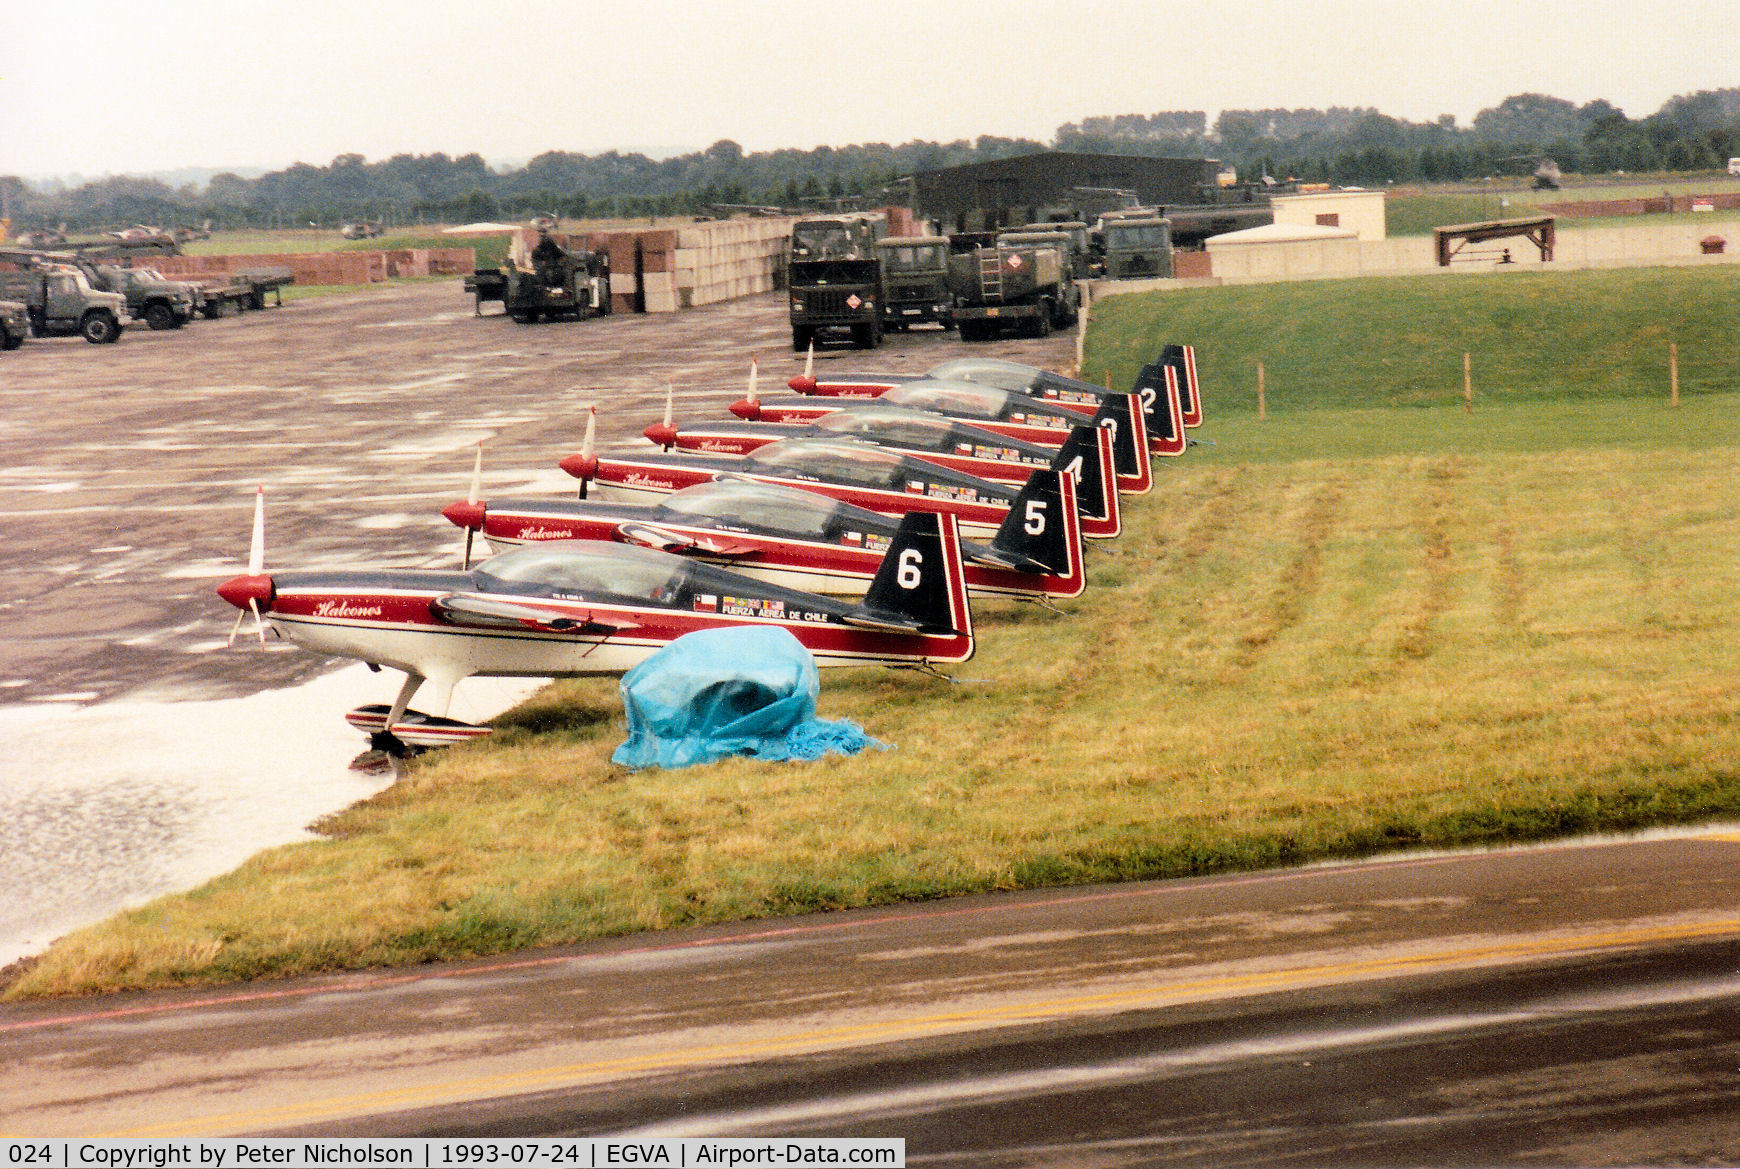 024, 1994 Extra EA-300S C/N 024, Los Halcones aerobatic display team of the Chilean Air Force on the flight-line at the 1993 Intnl Air Tattoo at RAF Fairford.